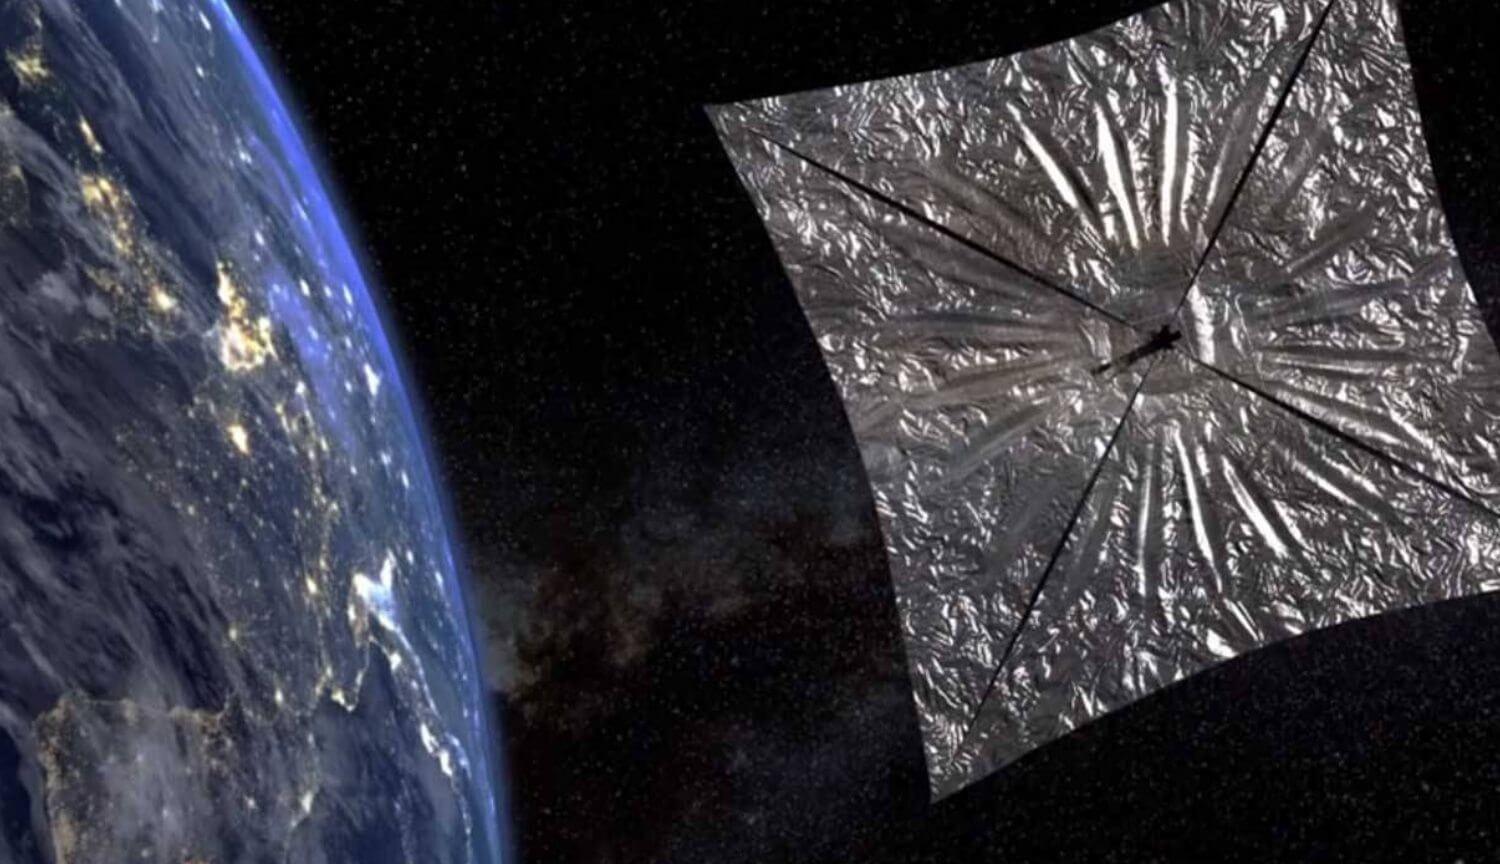 Above Ground opened a huge solar sail LightSail 2